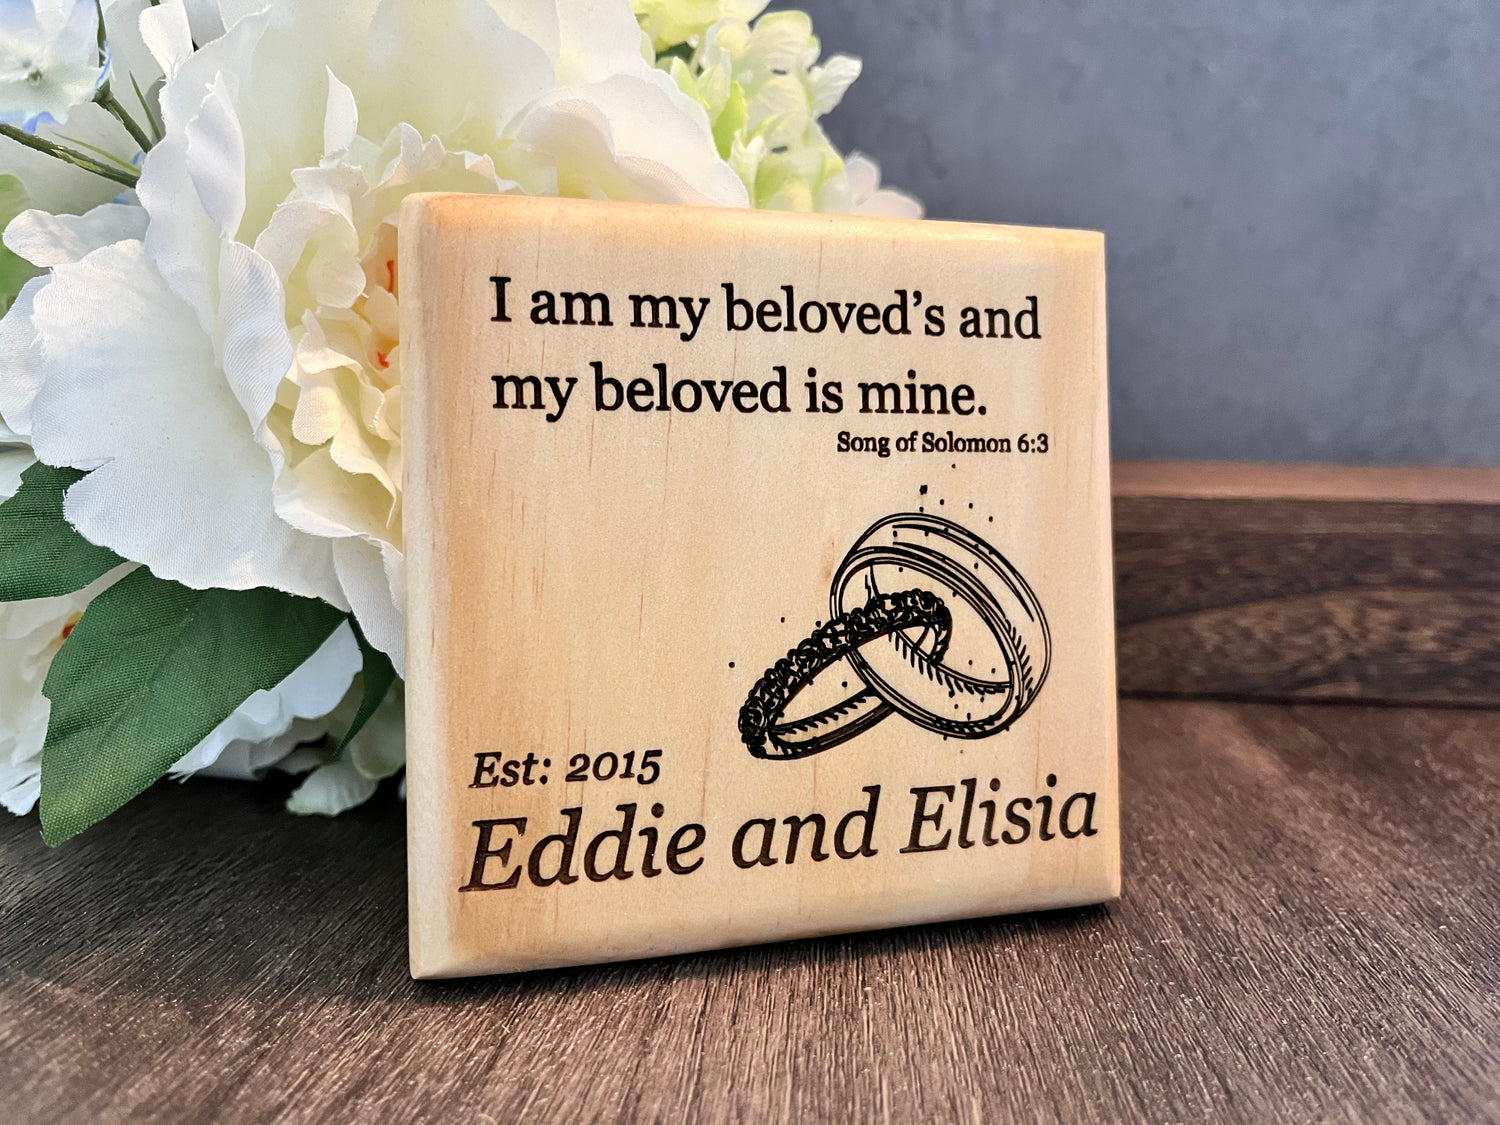 Laser Engraved Wooden Coasters: The Perfect Personalized Wedding or Anniversary Gift